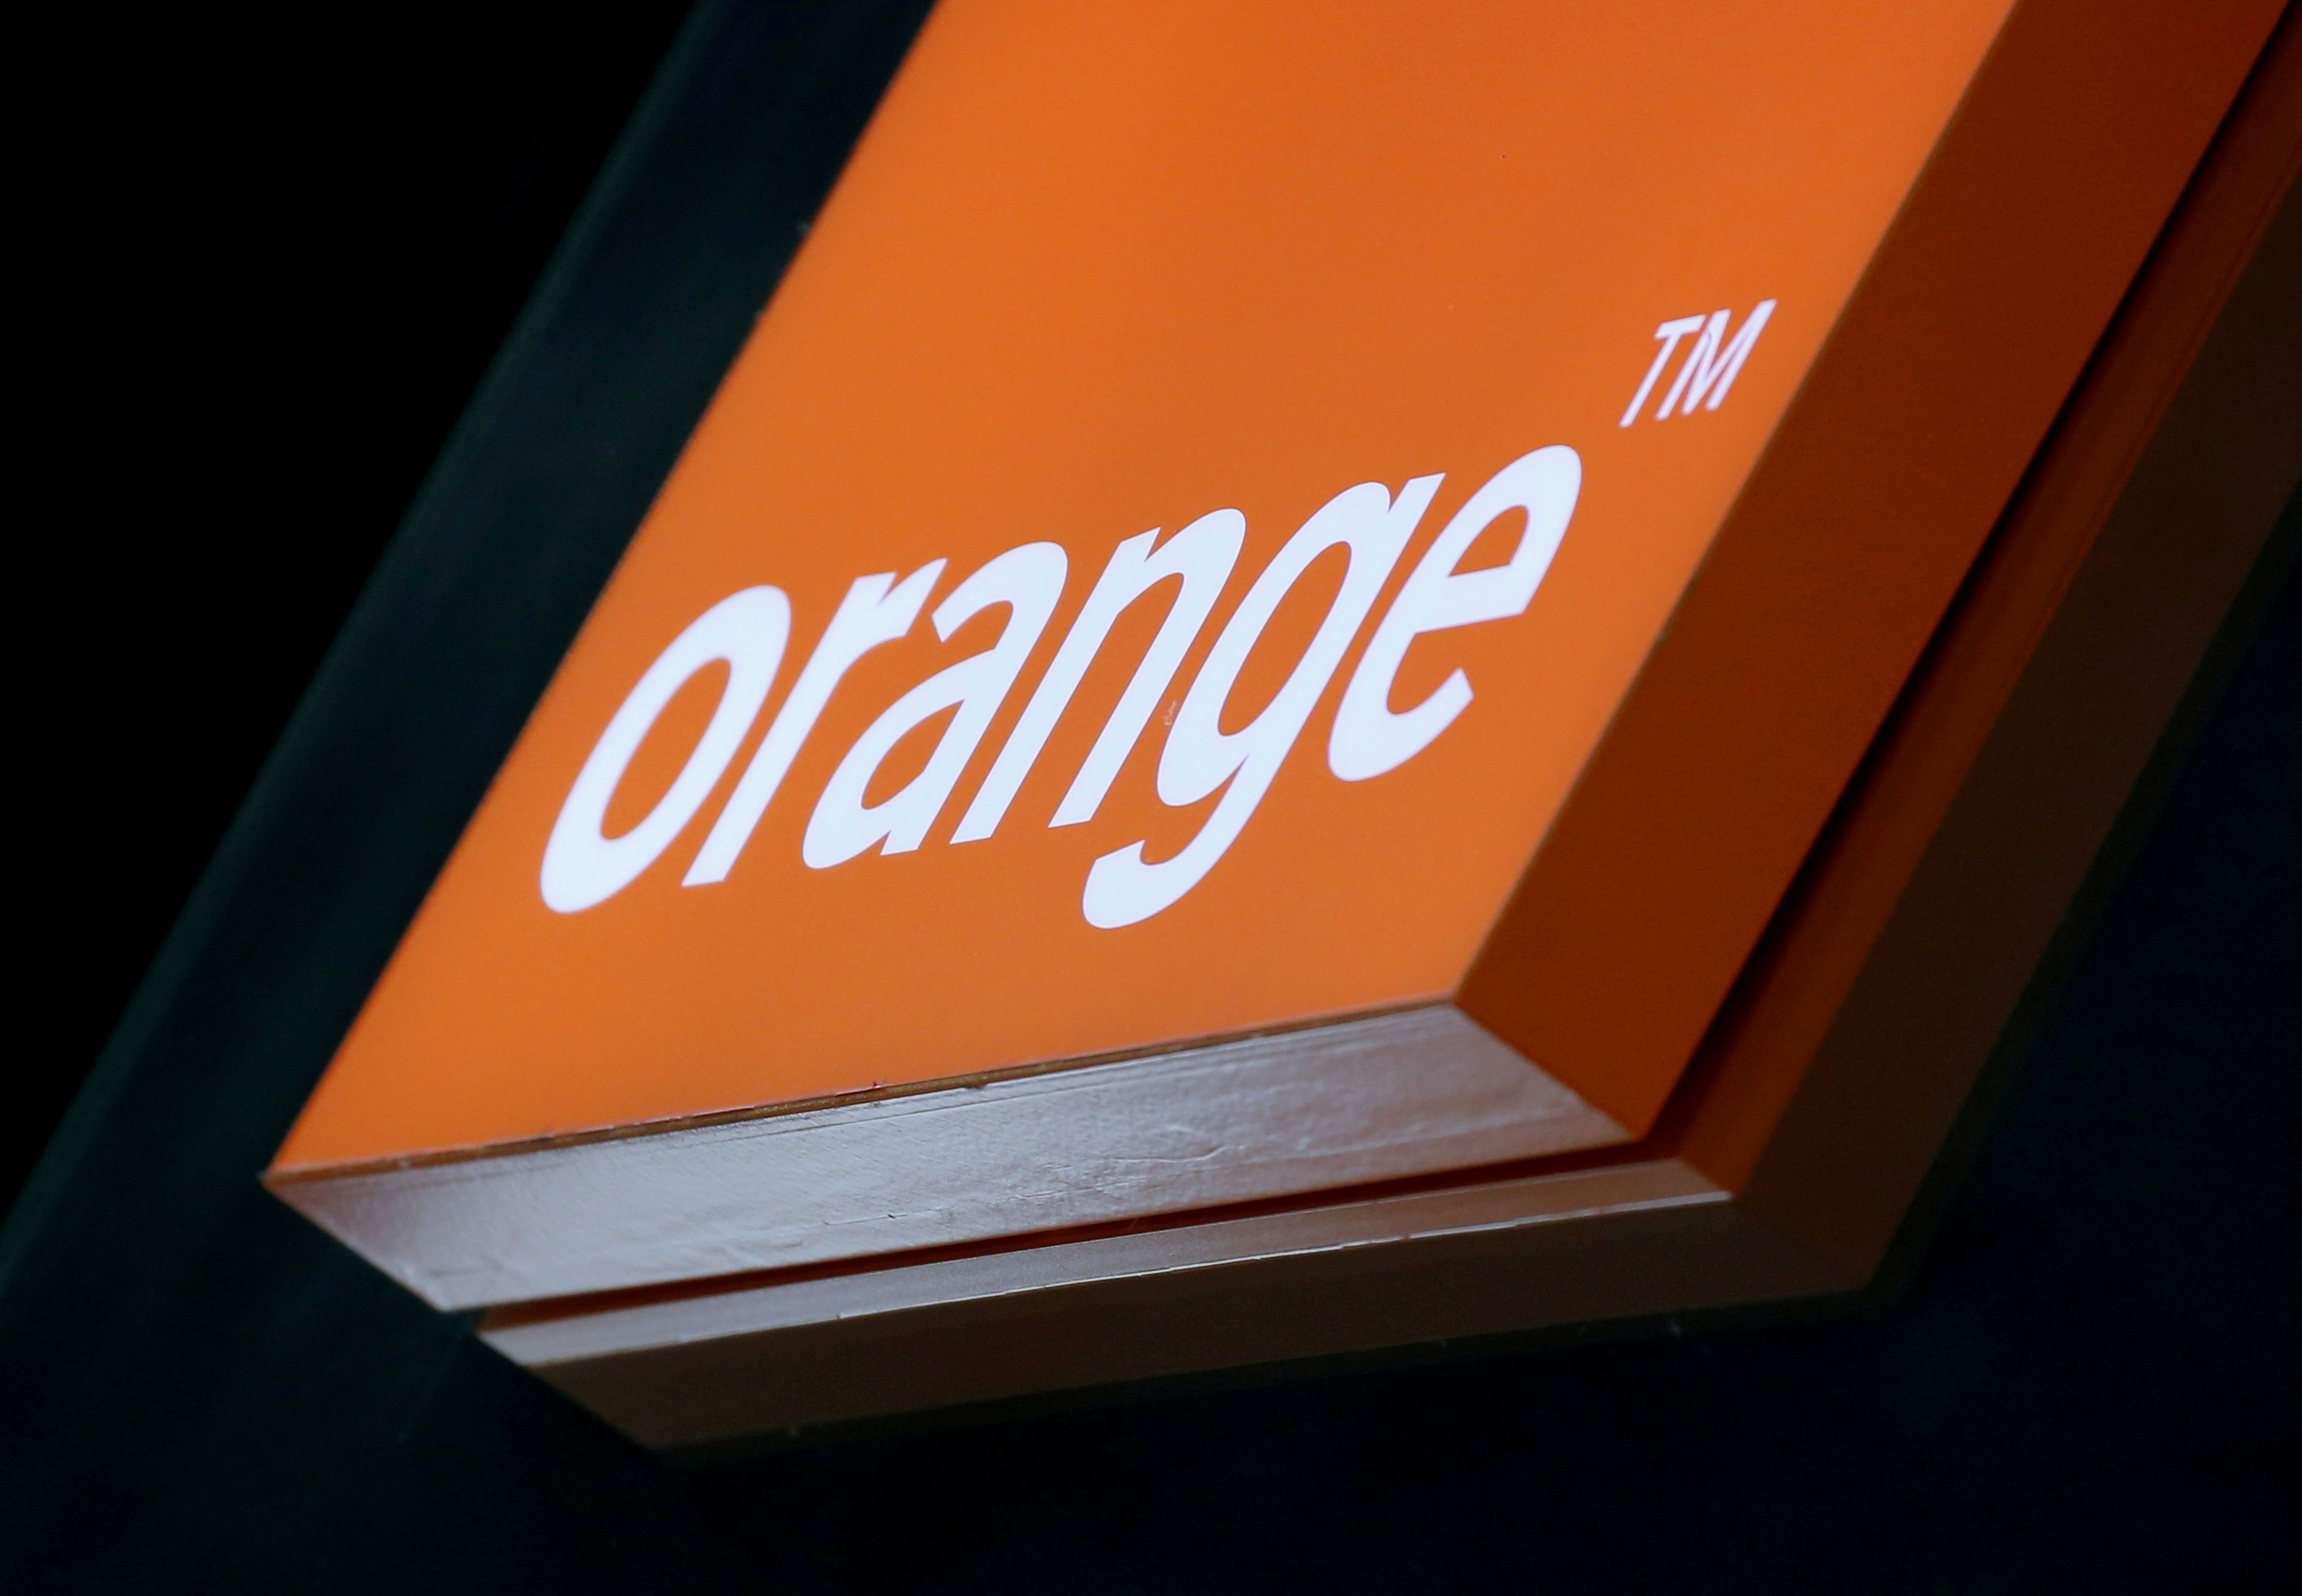 The logo of French telecoms group Orange is pictured in a retail store in Bordeaux